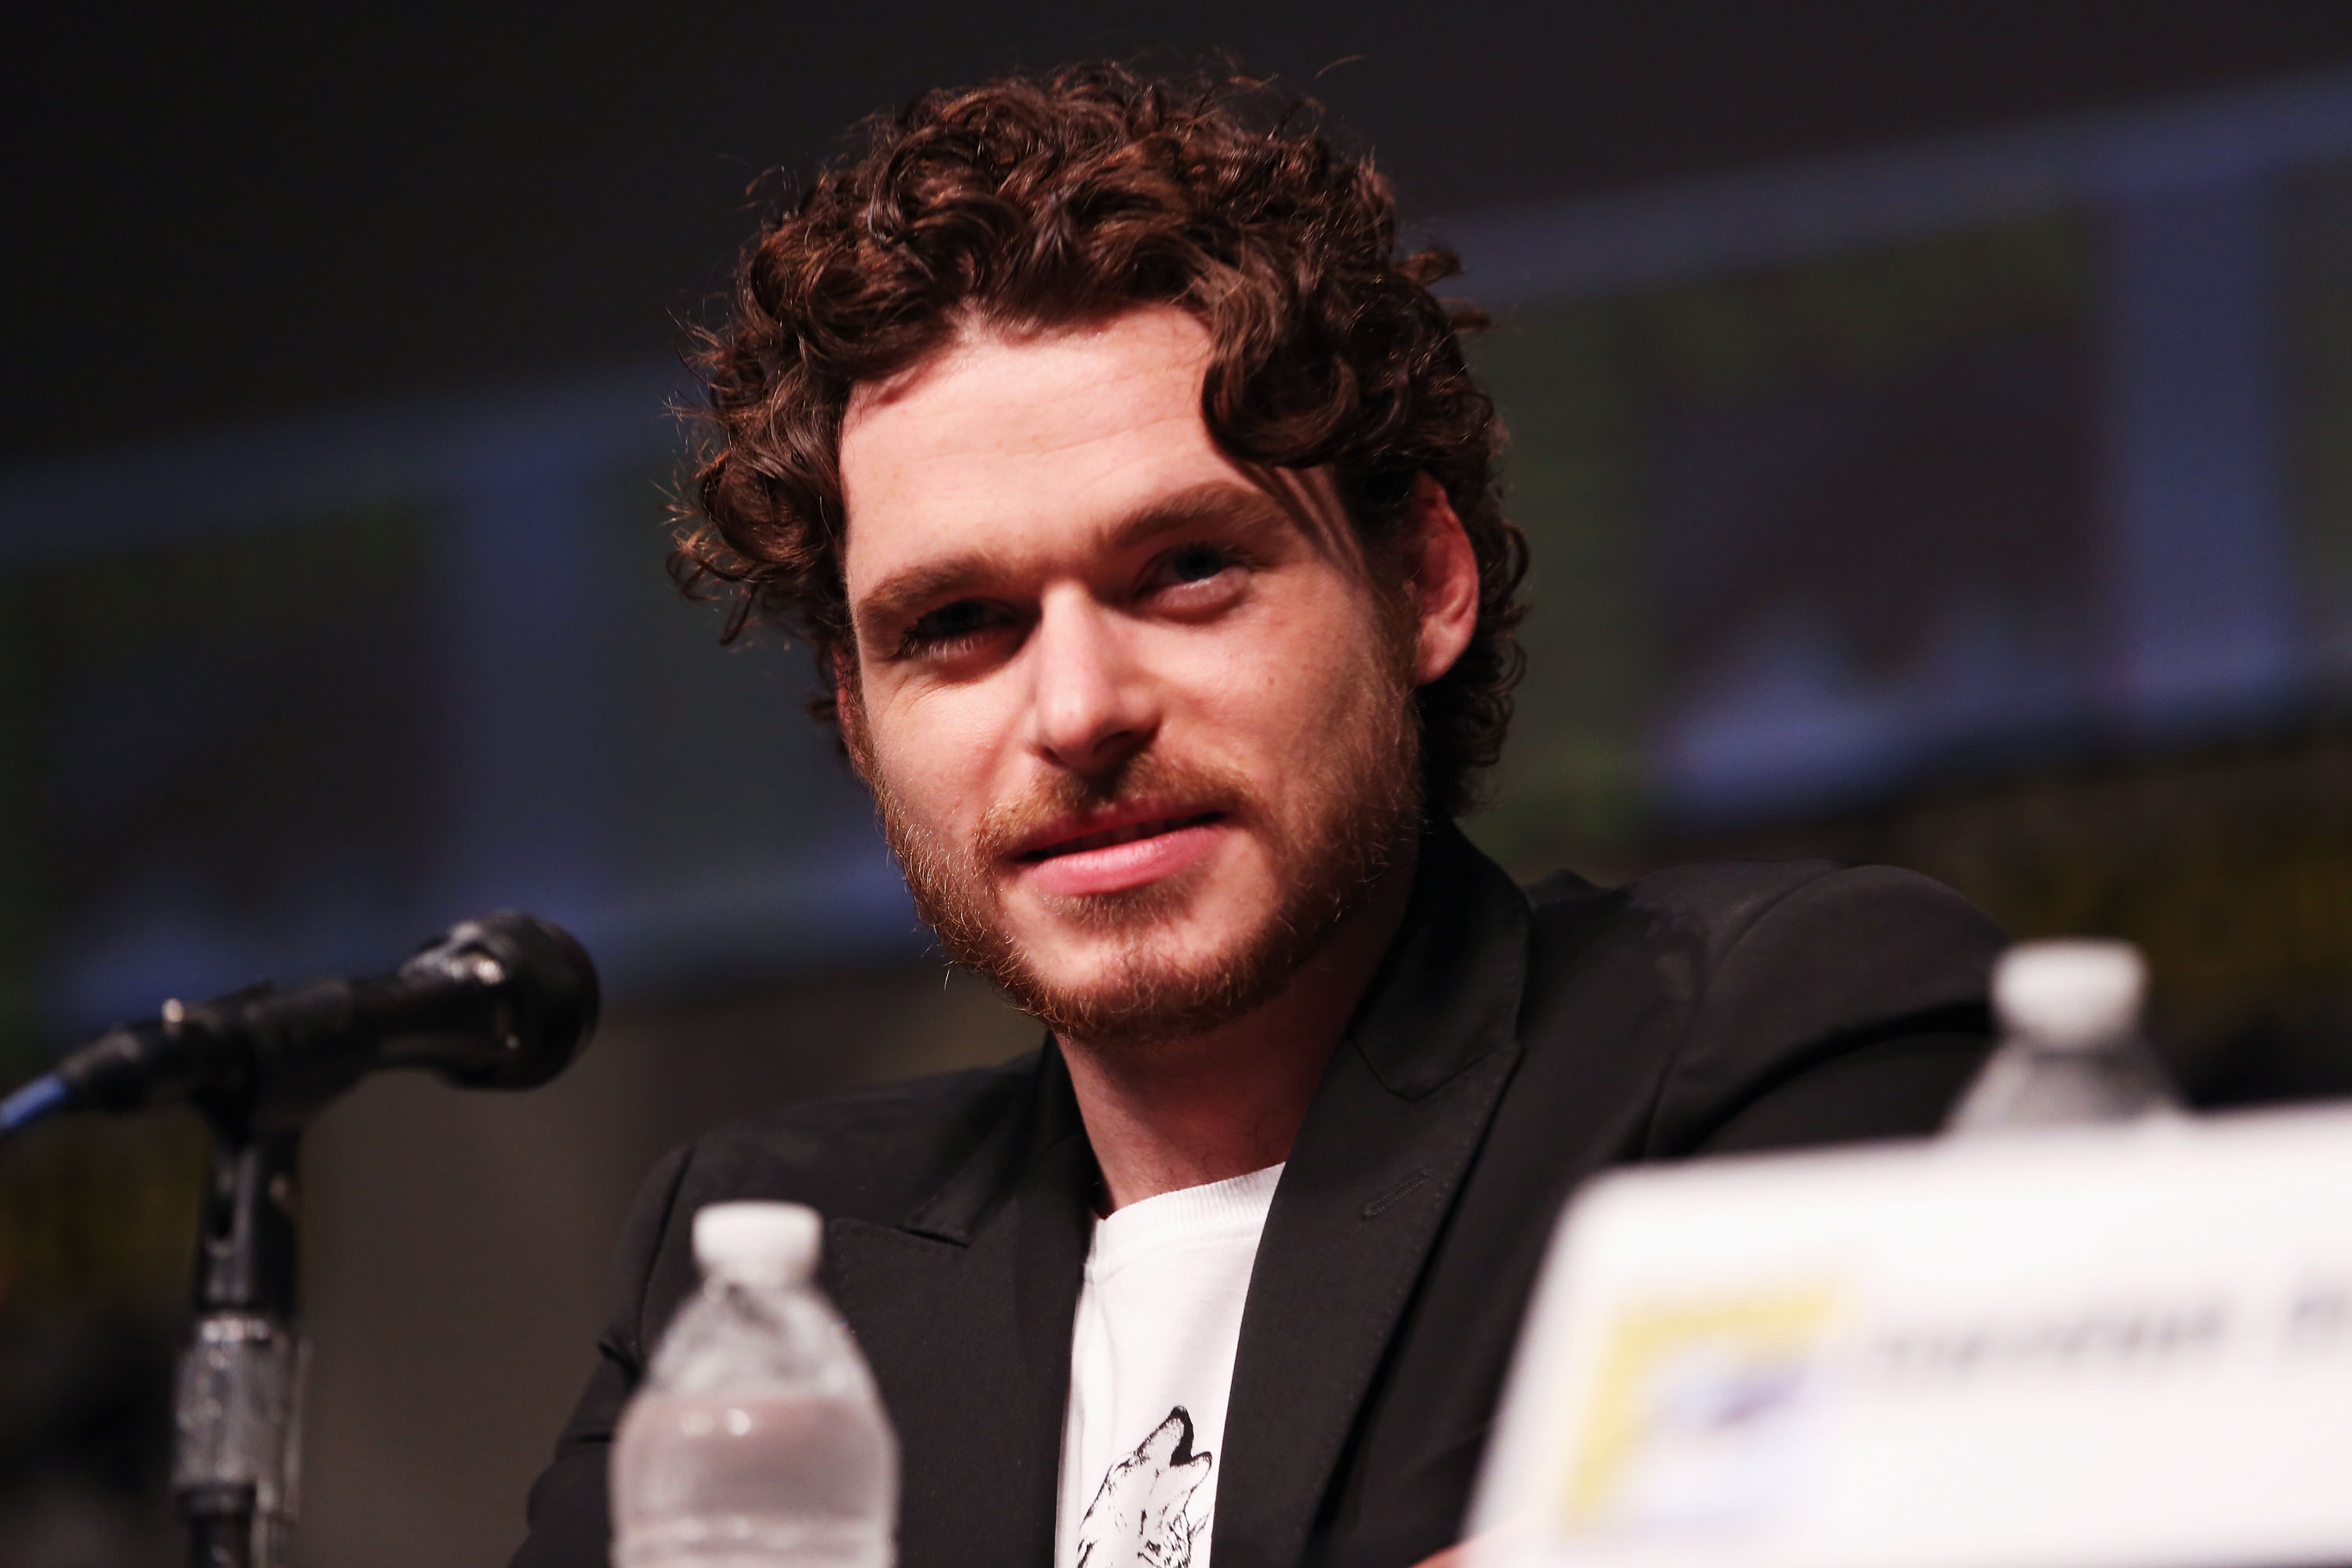 Richard Madden speaking at 'Game of Thrones' Comic-Con panel.